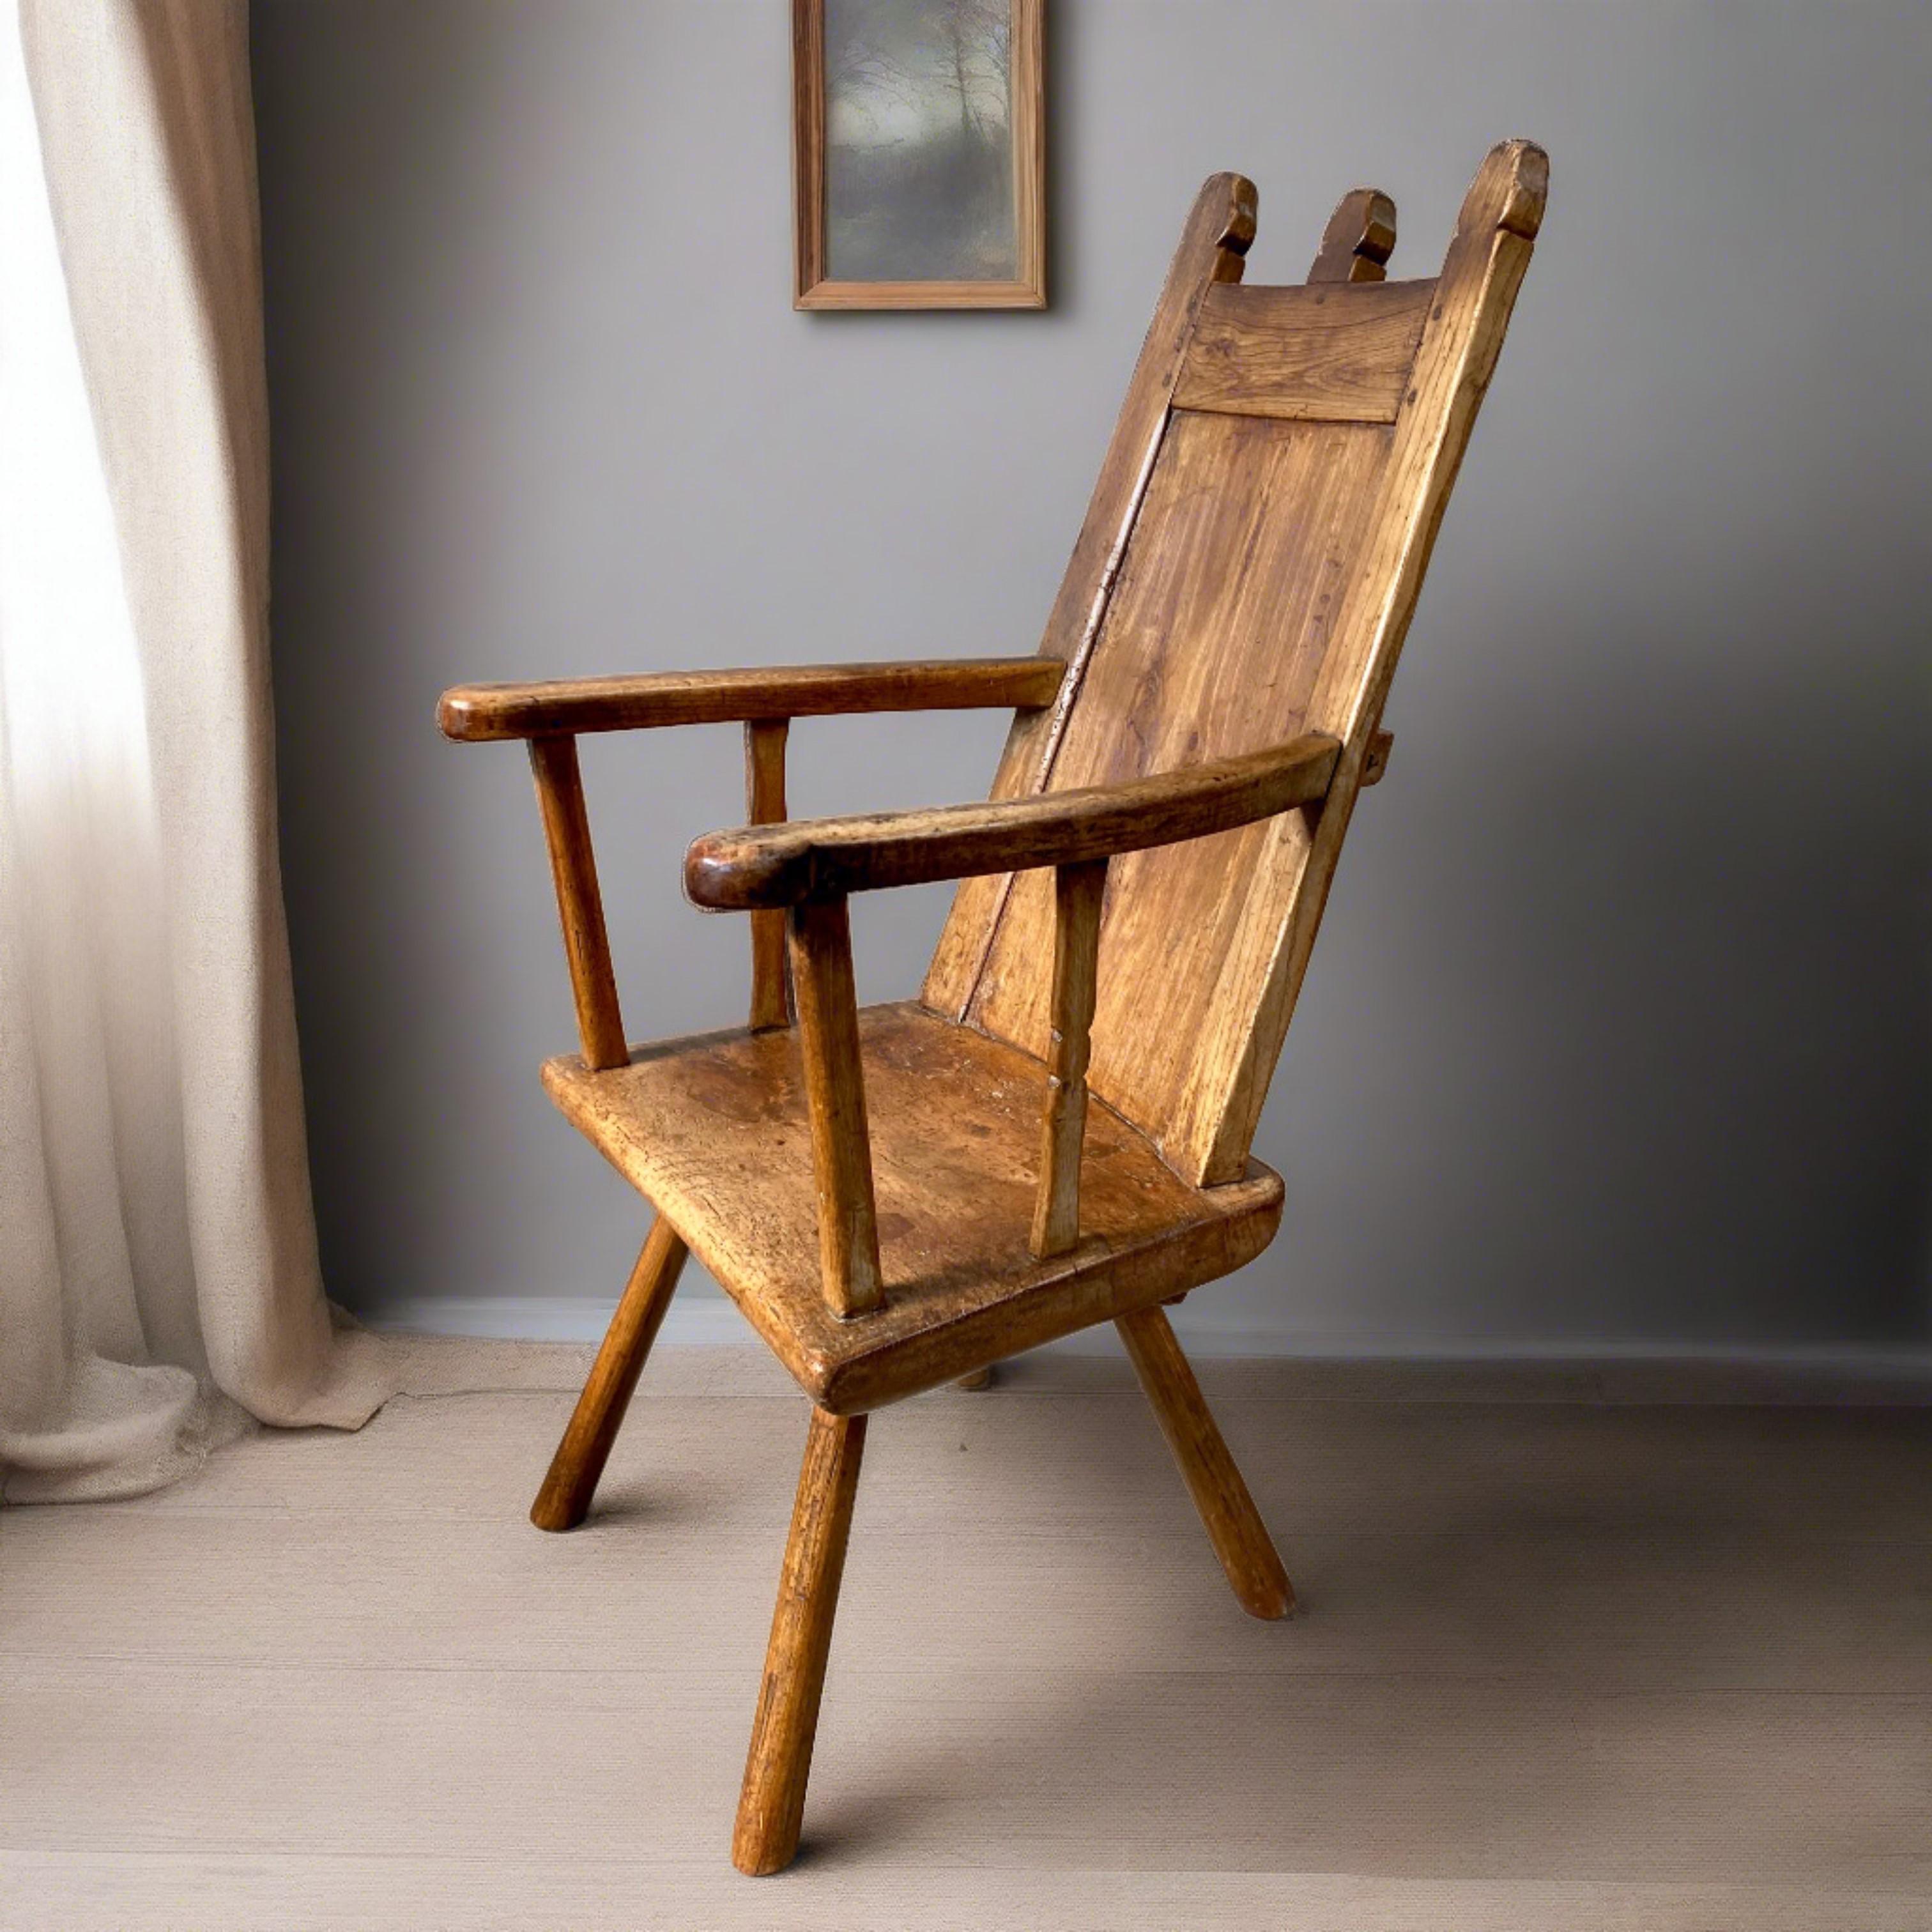 Introducing the Charismatic 18th Century Welsh Oak Armchair

Enhance your living space with the timeless elegance of our charismatic 18th century Welsh oak armchair. This remarkable piece exudes both charm and character, showcasing a perfect blend